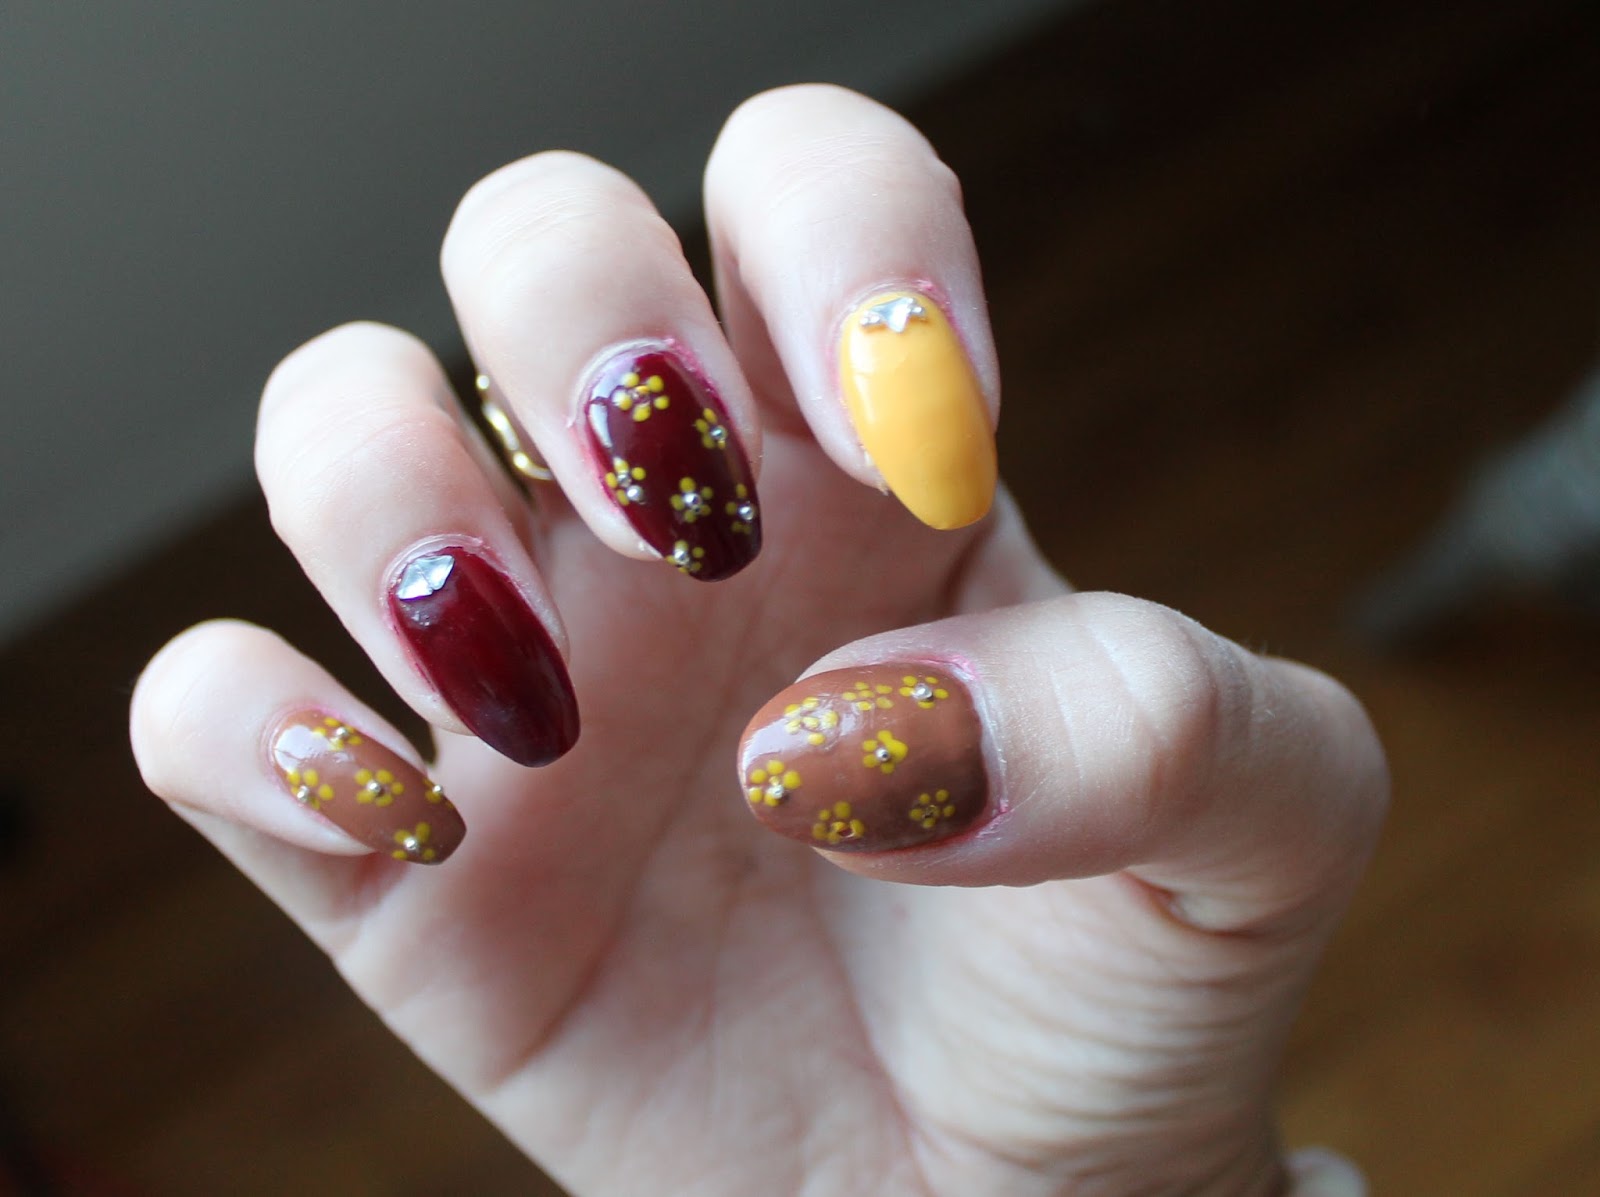 2. "Trendy Fall Nail Designs to Try This Season" - wide 7